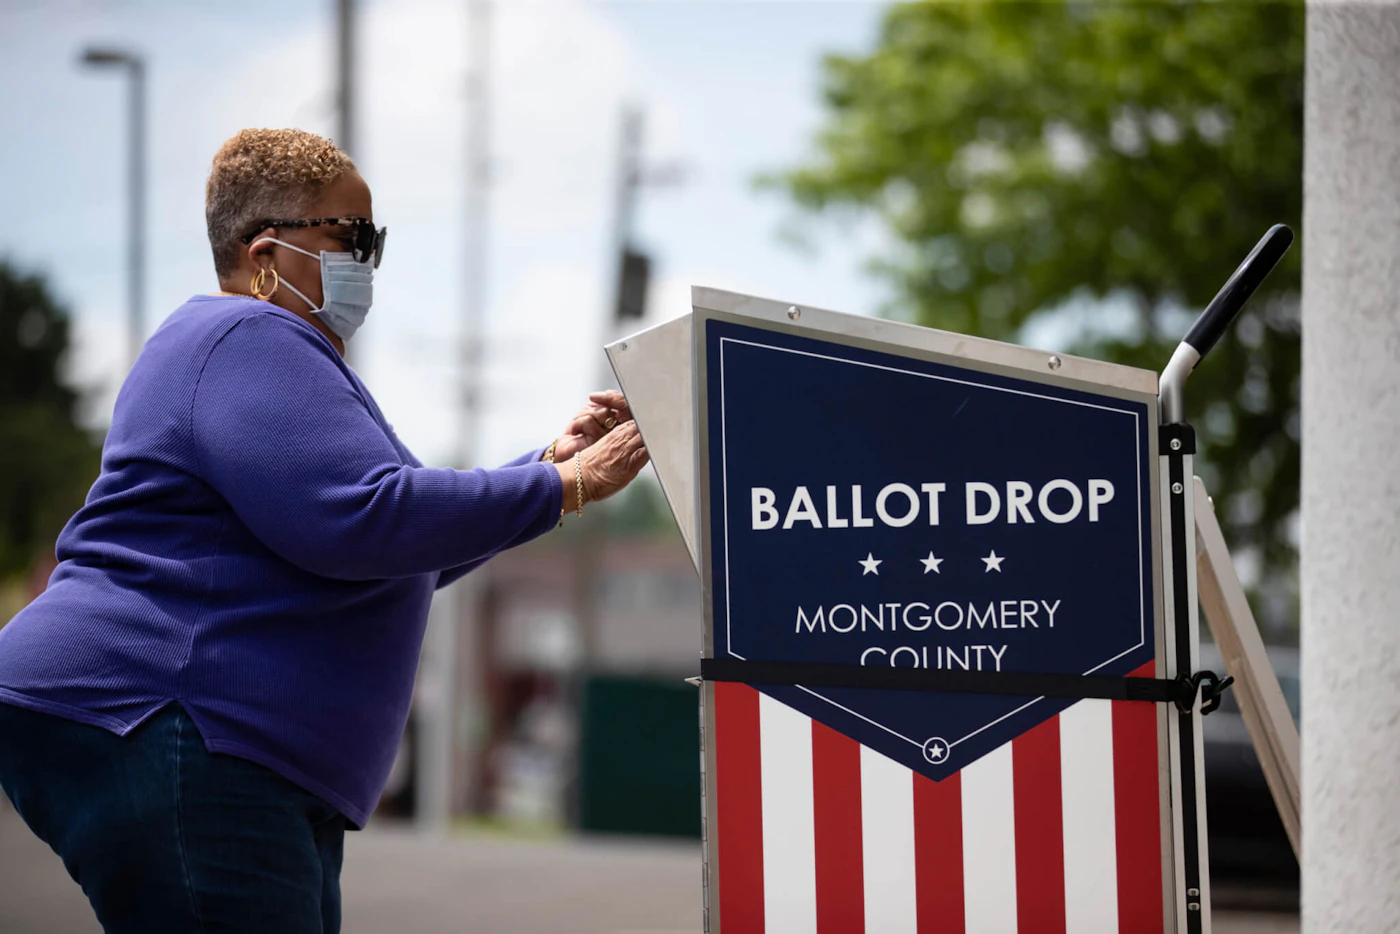 A voter drops off their mail-in ballot prior to the primary election, in Willow Grove, Pa., Wednesday, May 27, 2020. (AP Photo/Matt Rourke)